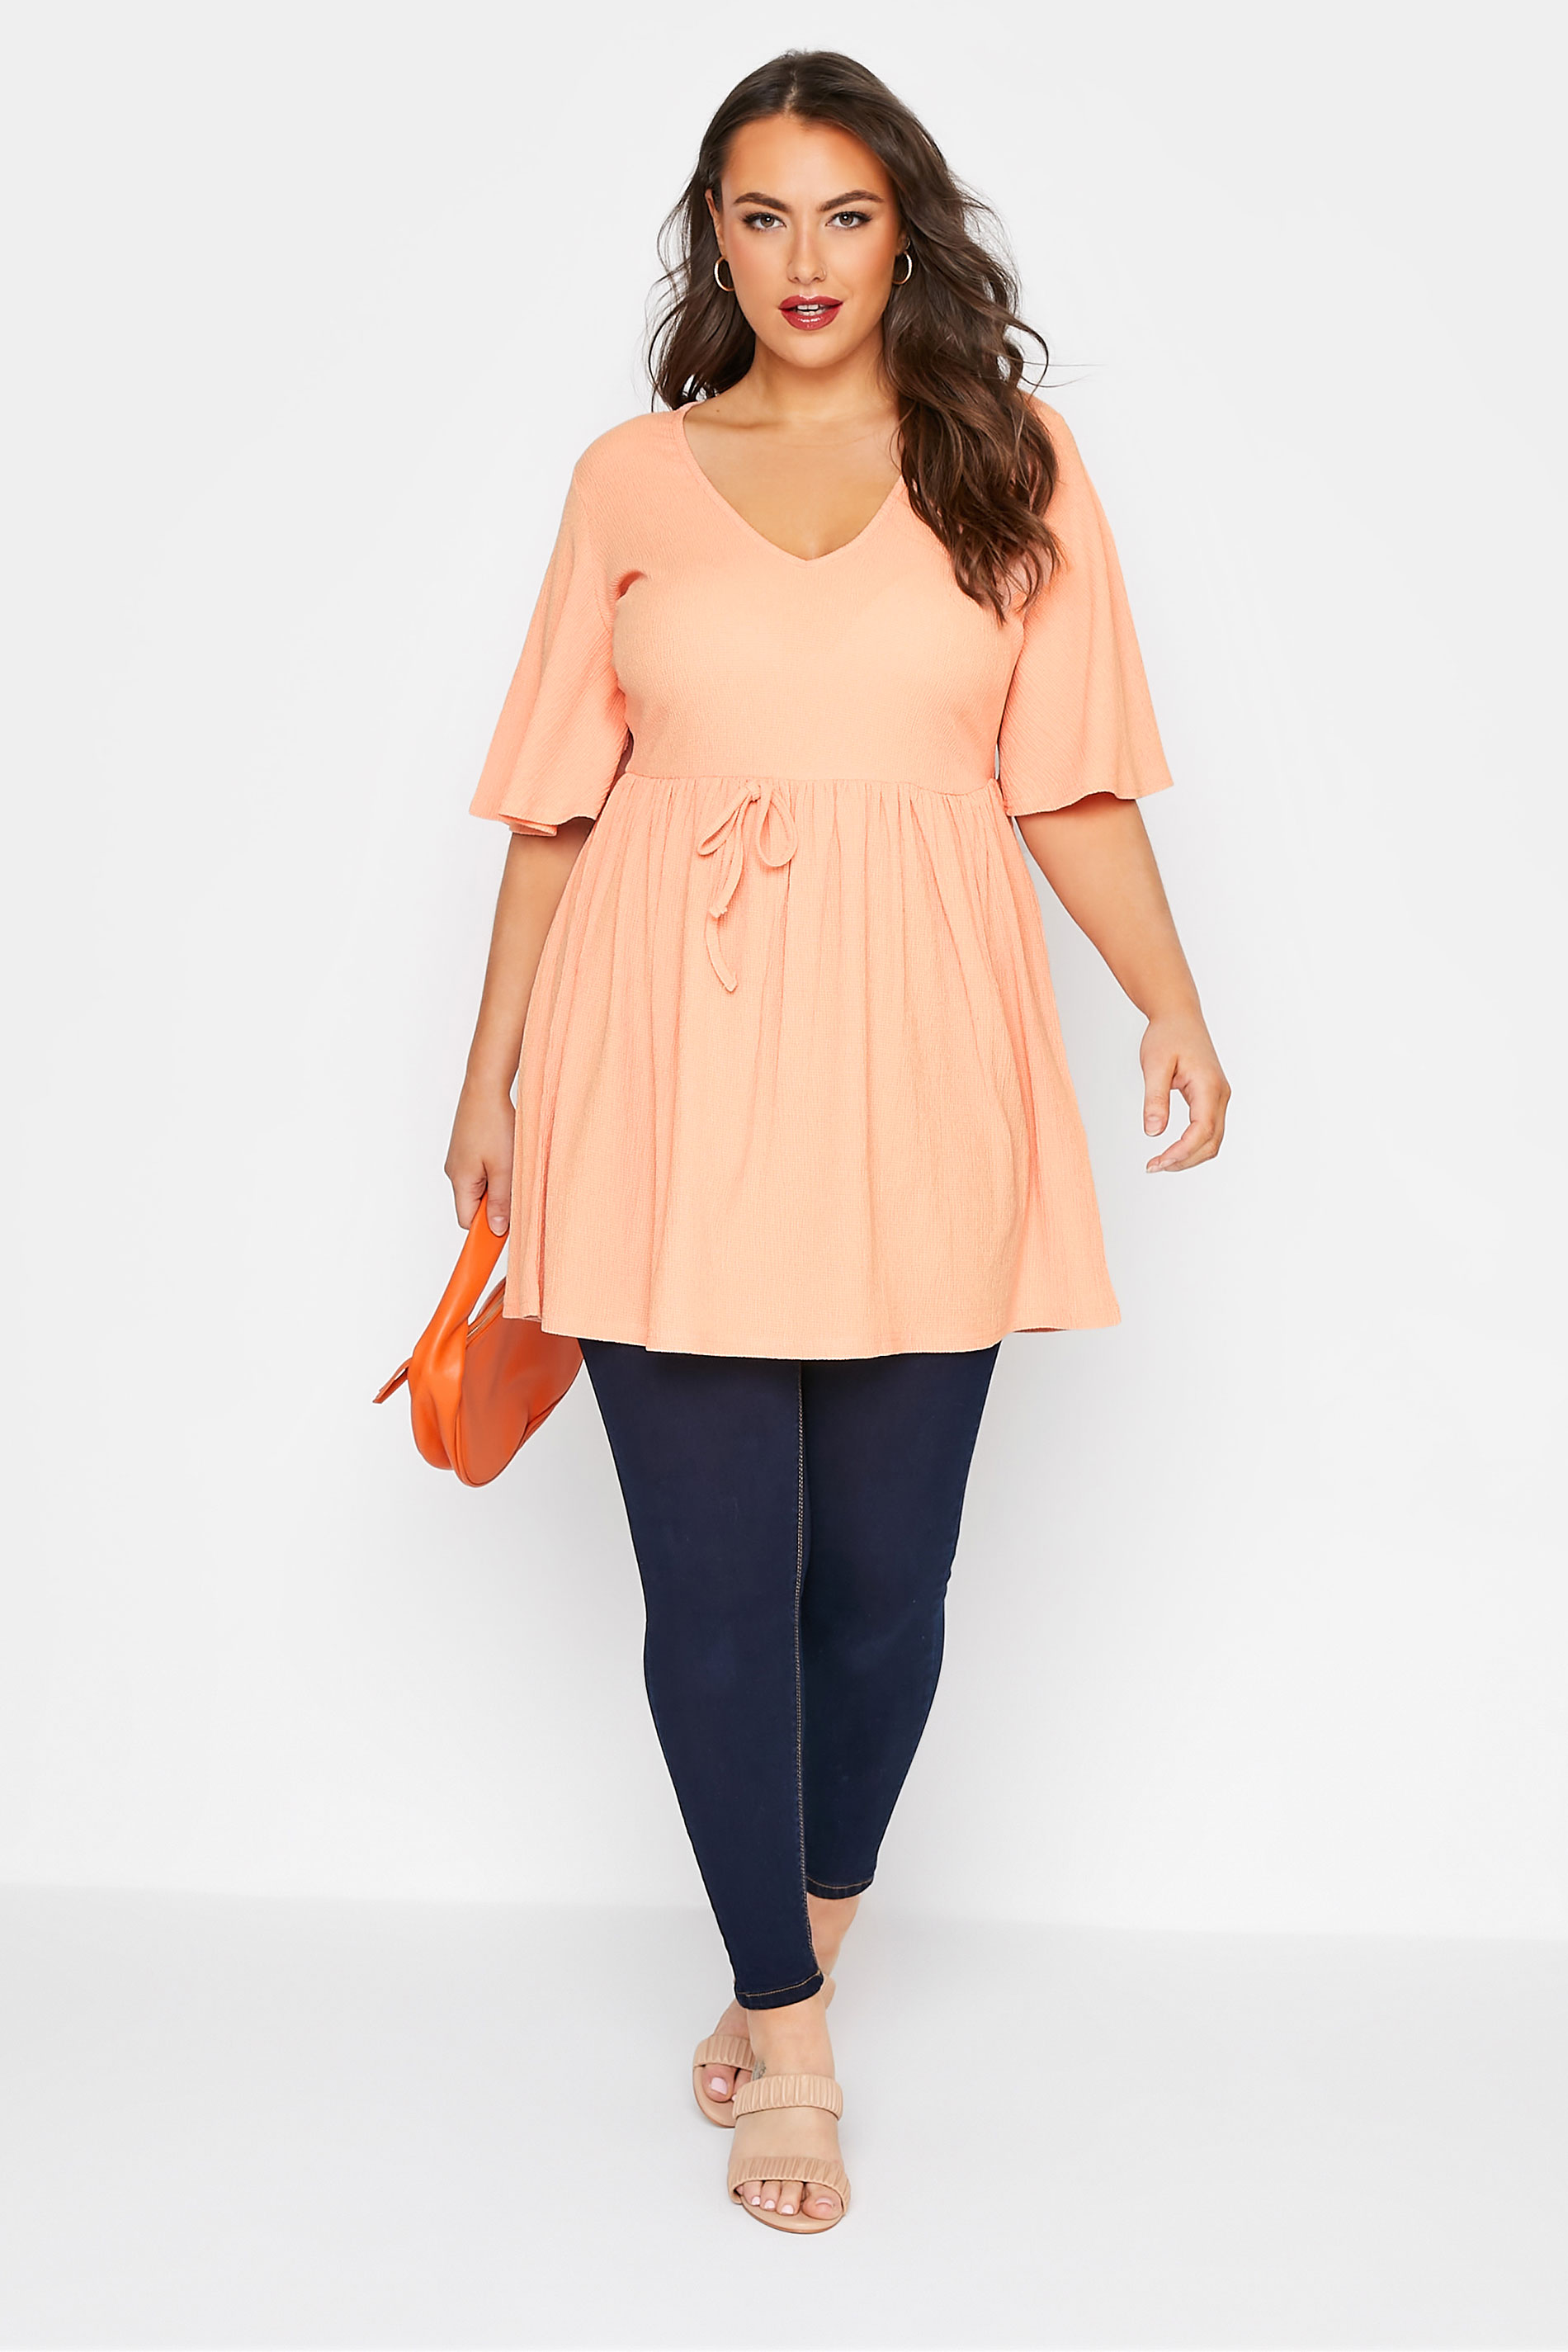 Grande taille  Tops Grande taille  Tops Casual | LIMITED COLLECTION - Top Orange Manches Courtes Ficelle - BR36882